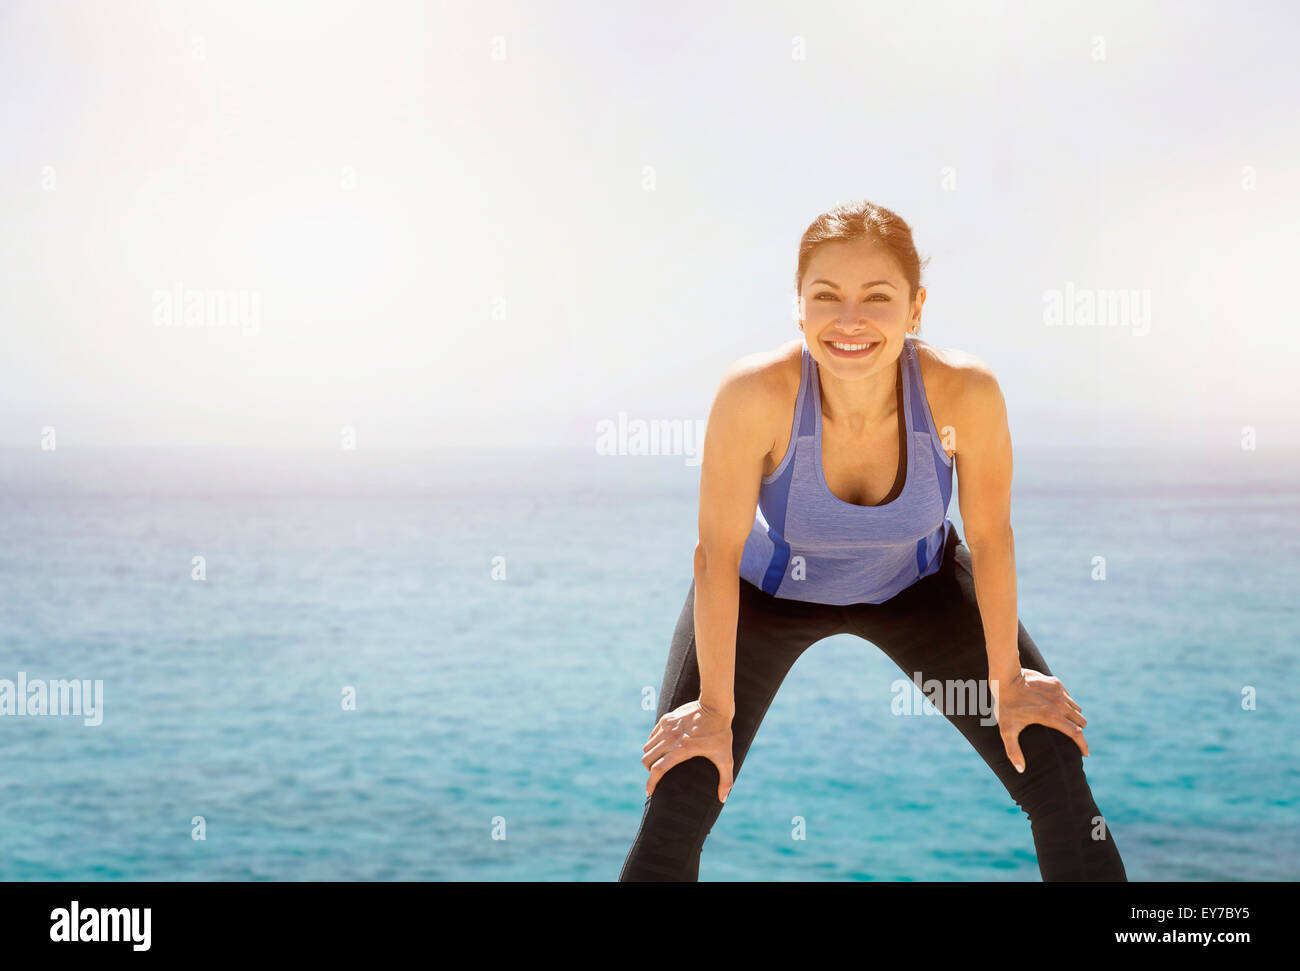 Young woman exercising by sea Stock Photo